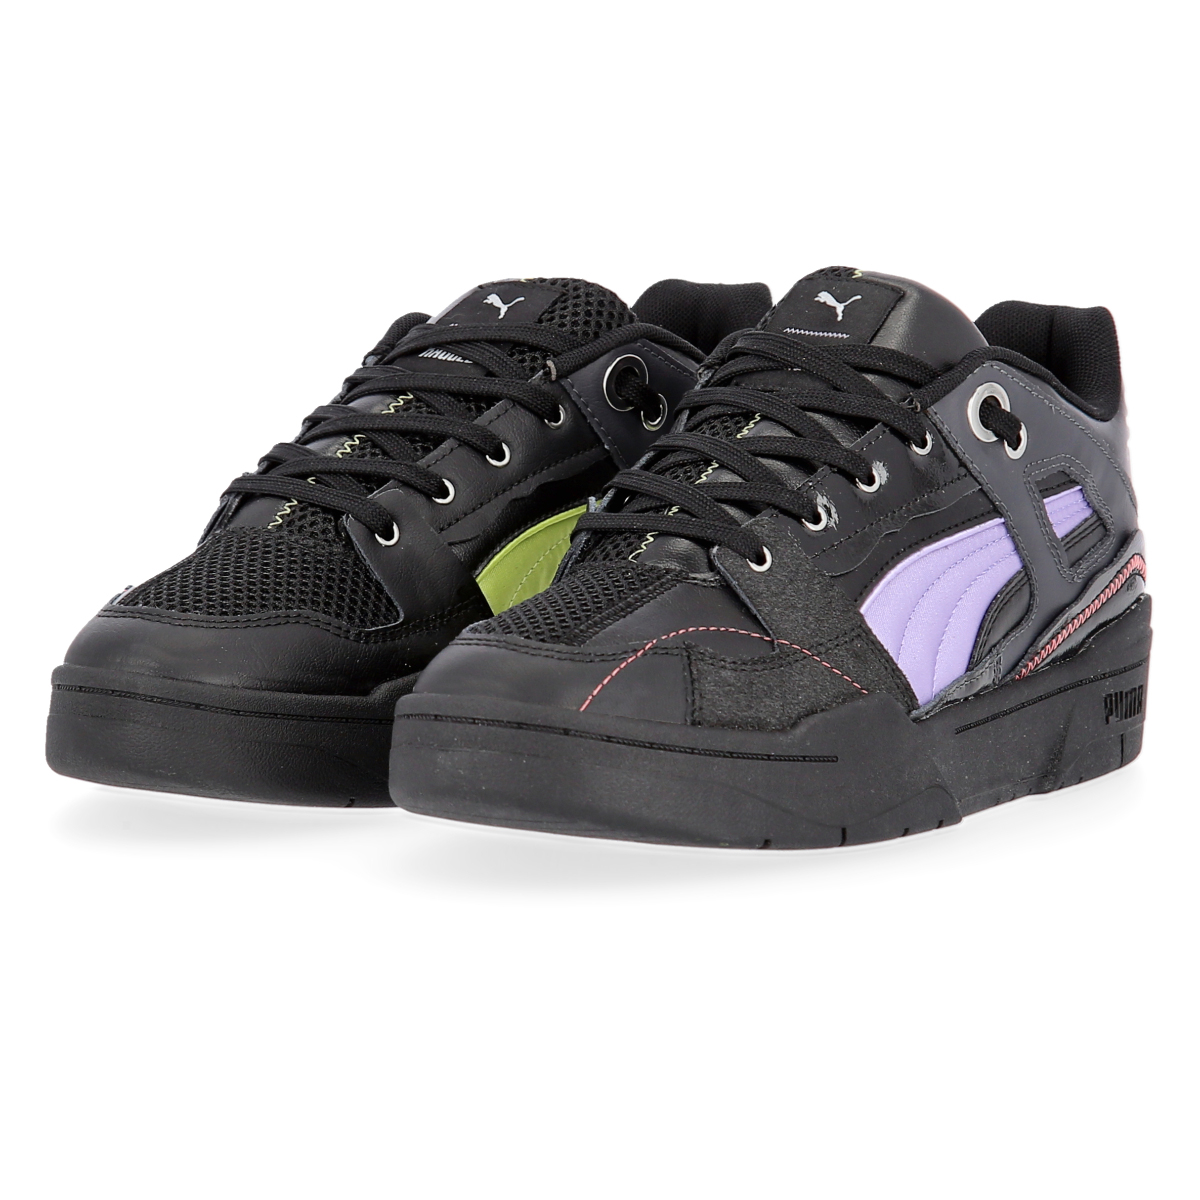 Zapatillas Puma Slipstream The Ragged Priest Mujer,  image number null